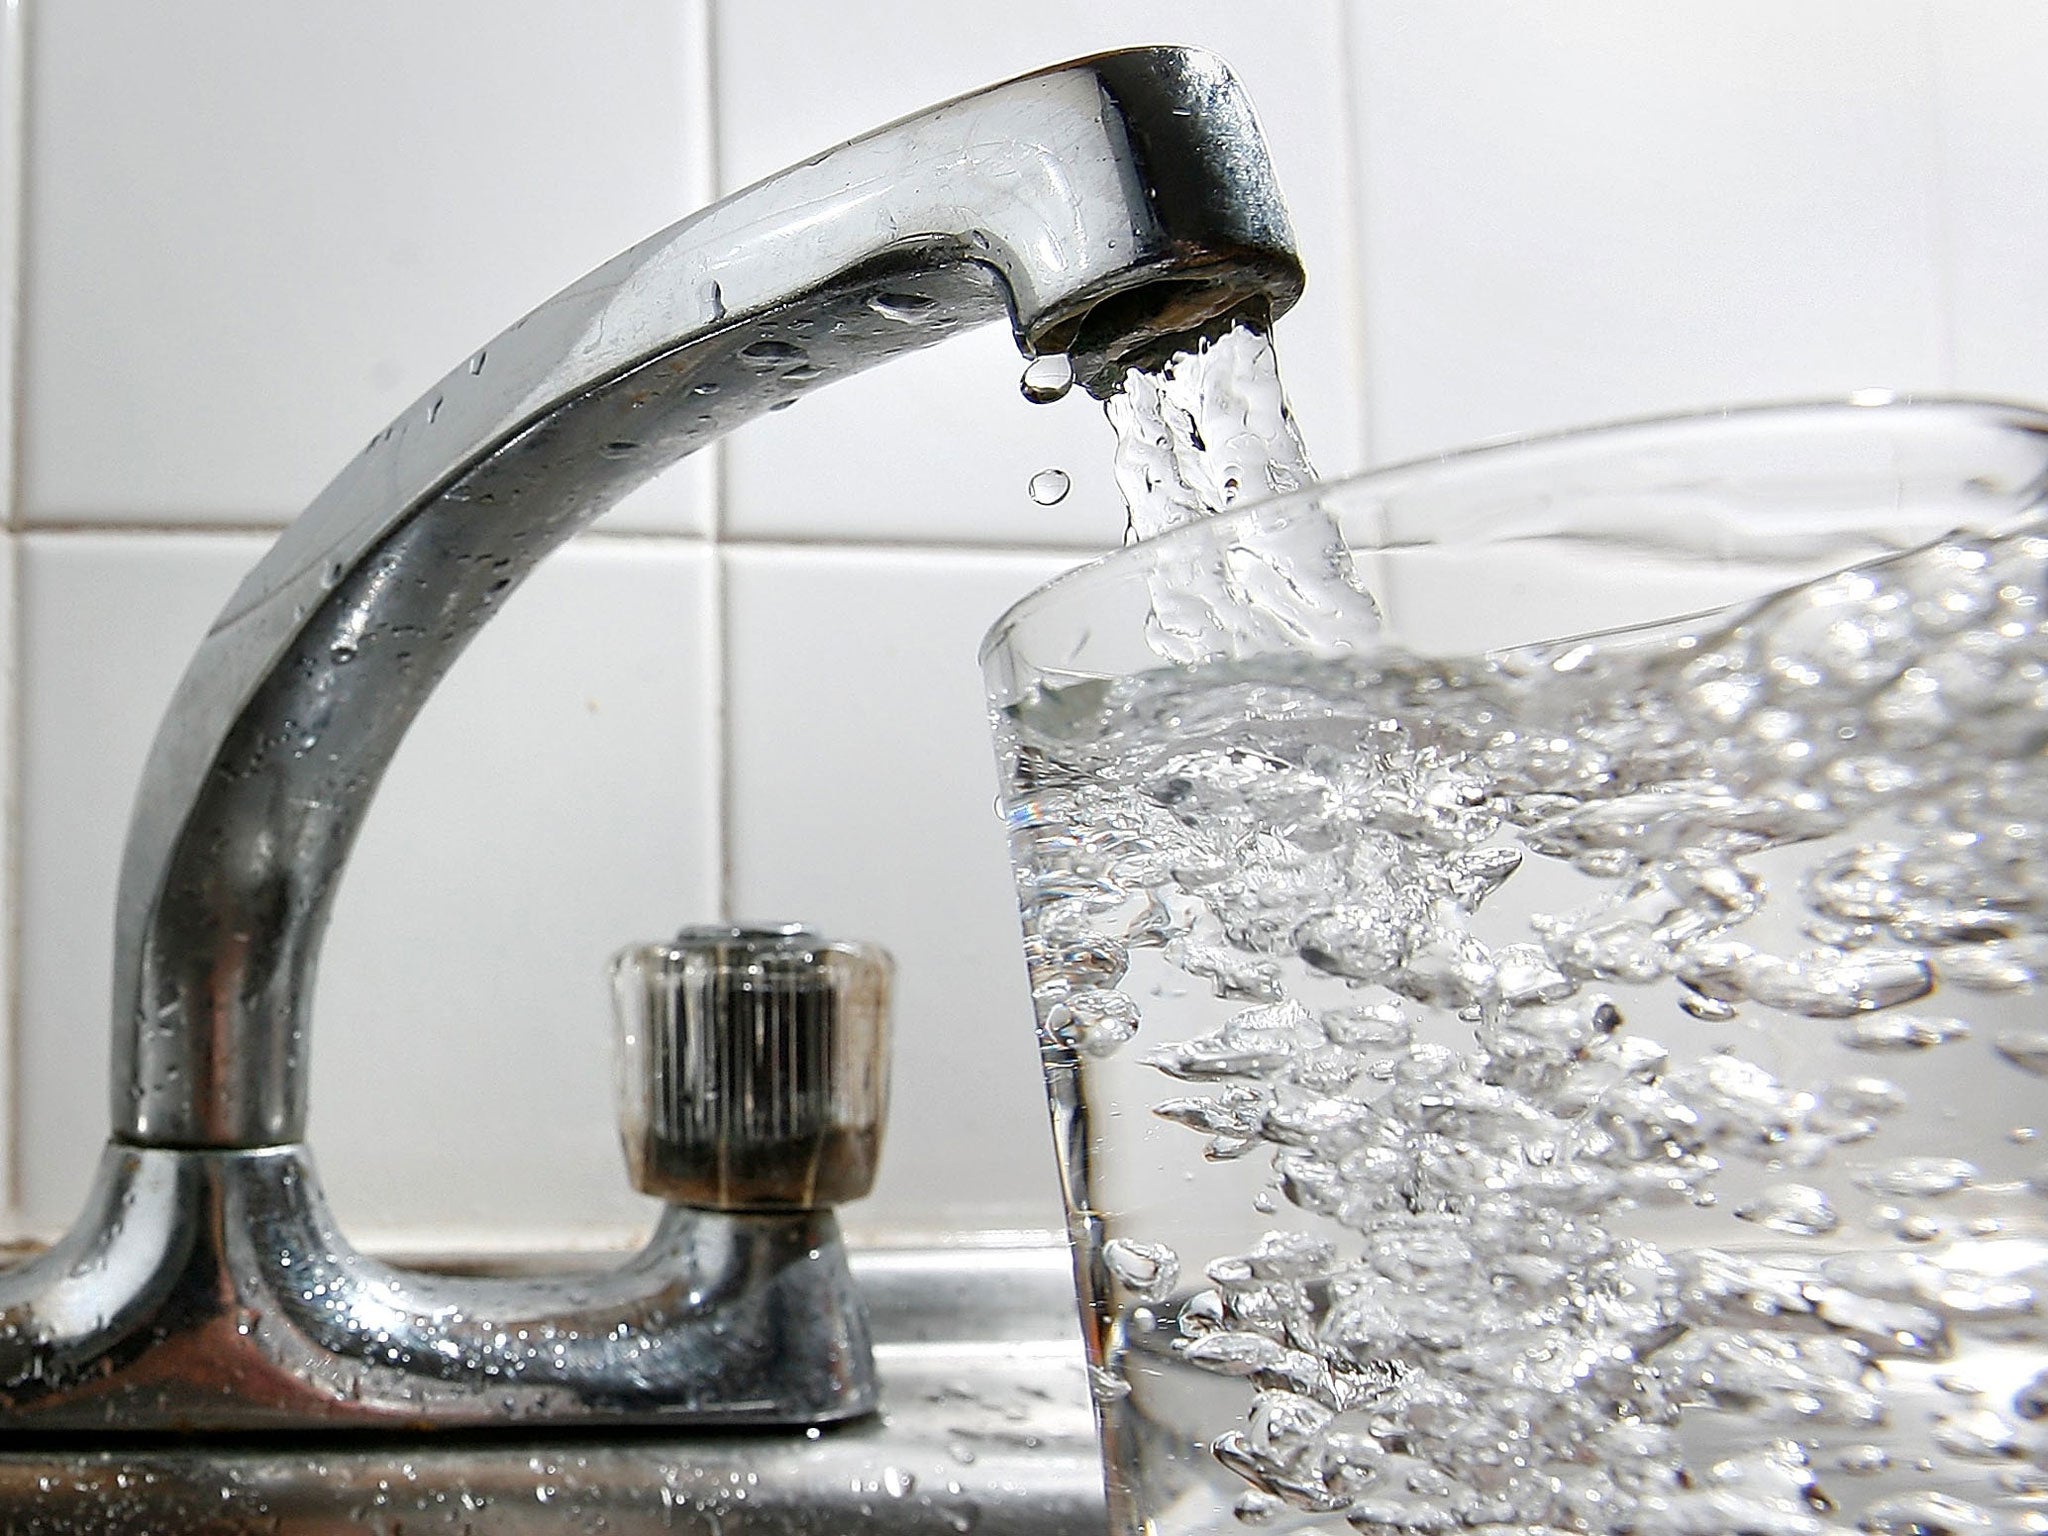 British water companies are avoiding millions of pounds in tax